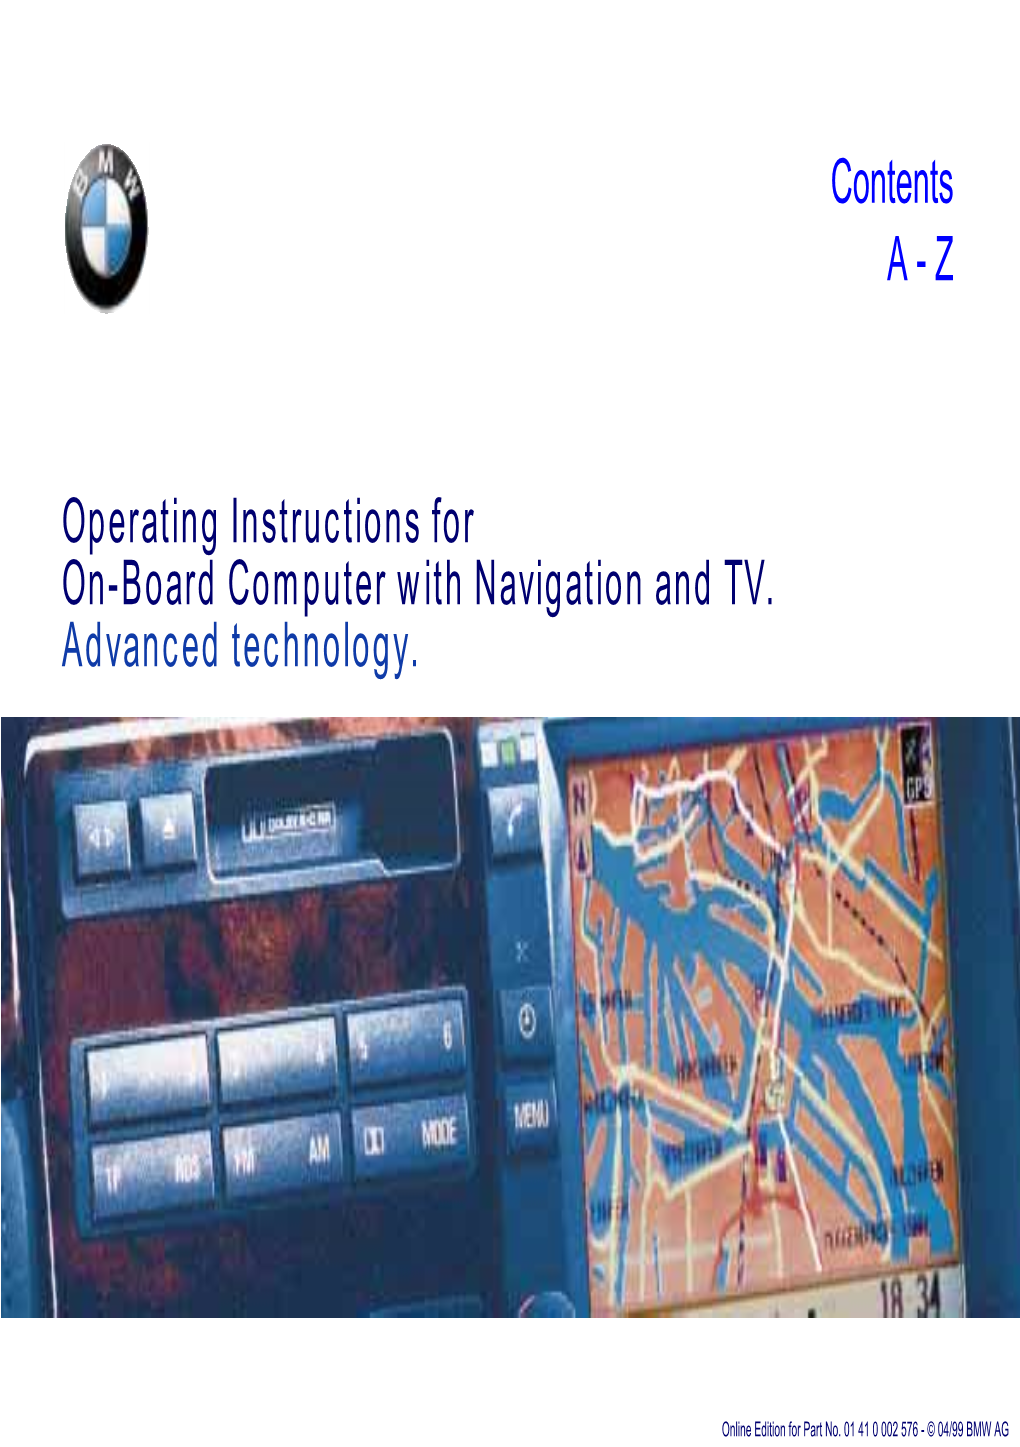 Operating Instructions for On-Board Computer with Navigation and TV